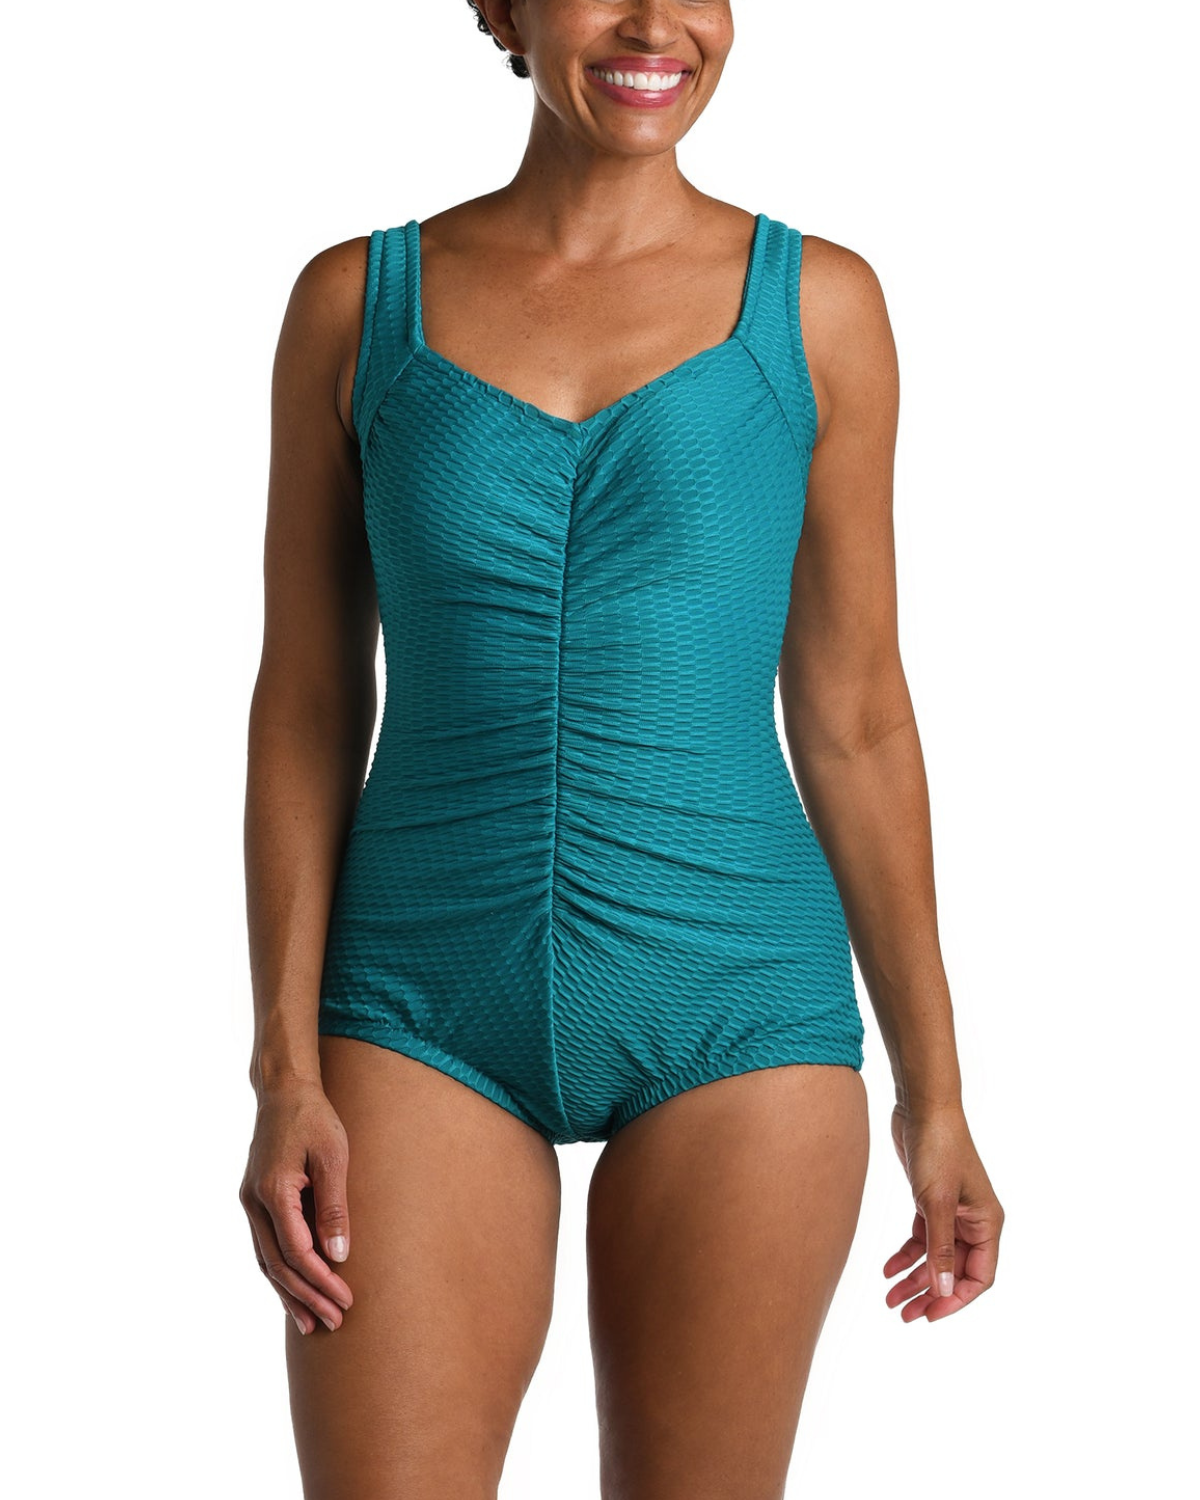 Model wearing a textured one piece swimsuit with a girl leg cut in emerald